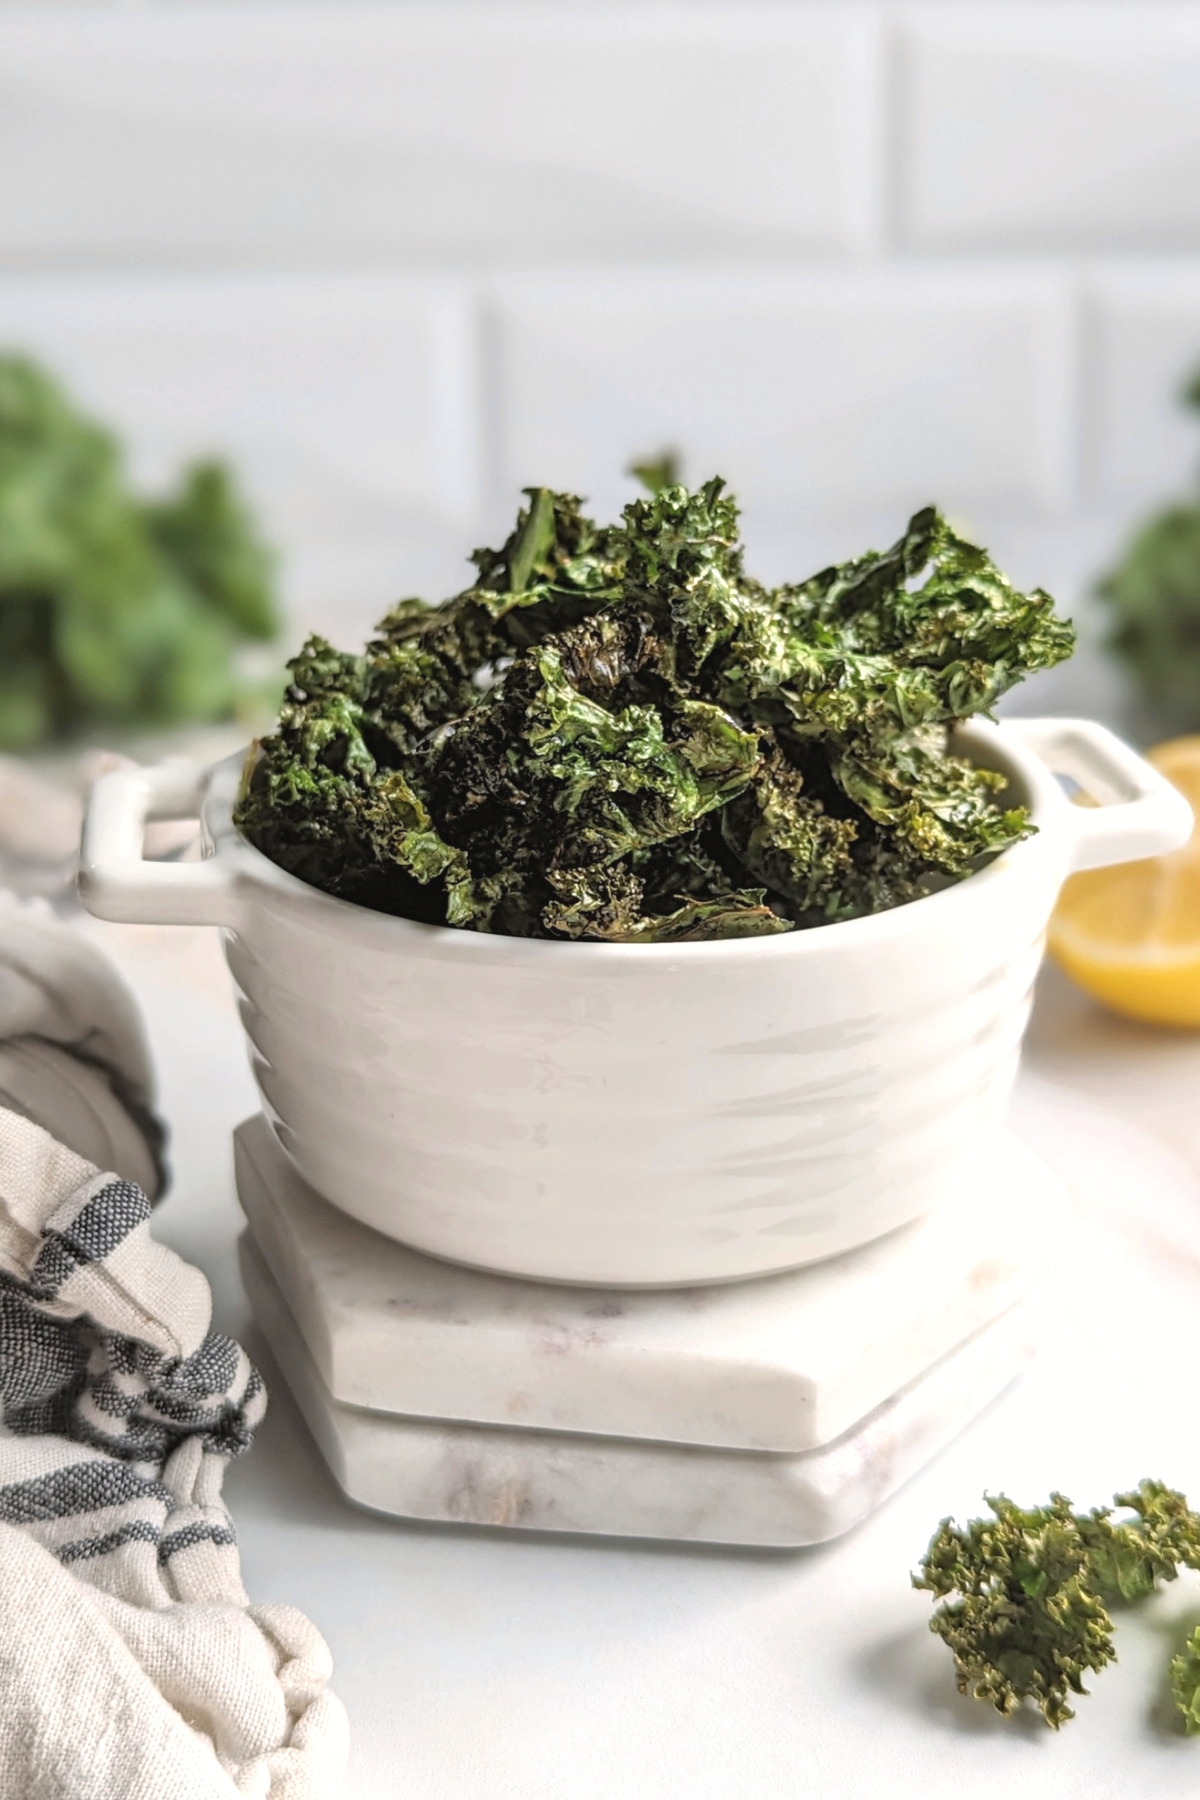 how to make kale chips in air fryer recipe easy homemade kale chip recipe with olive oil lemon salt and garlic powder